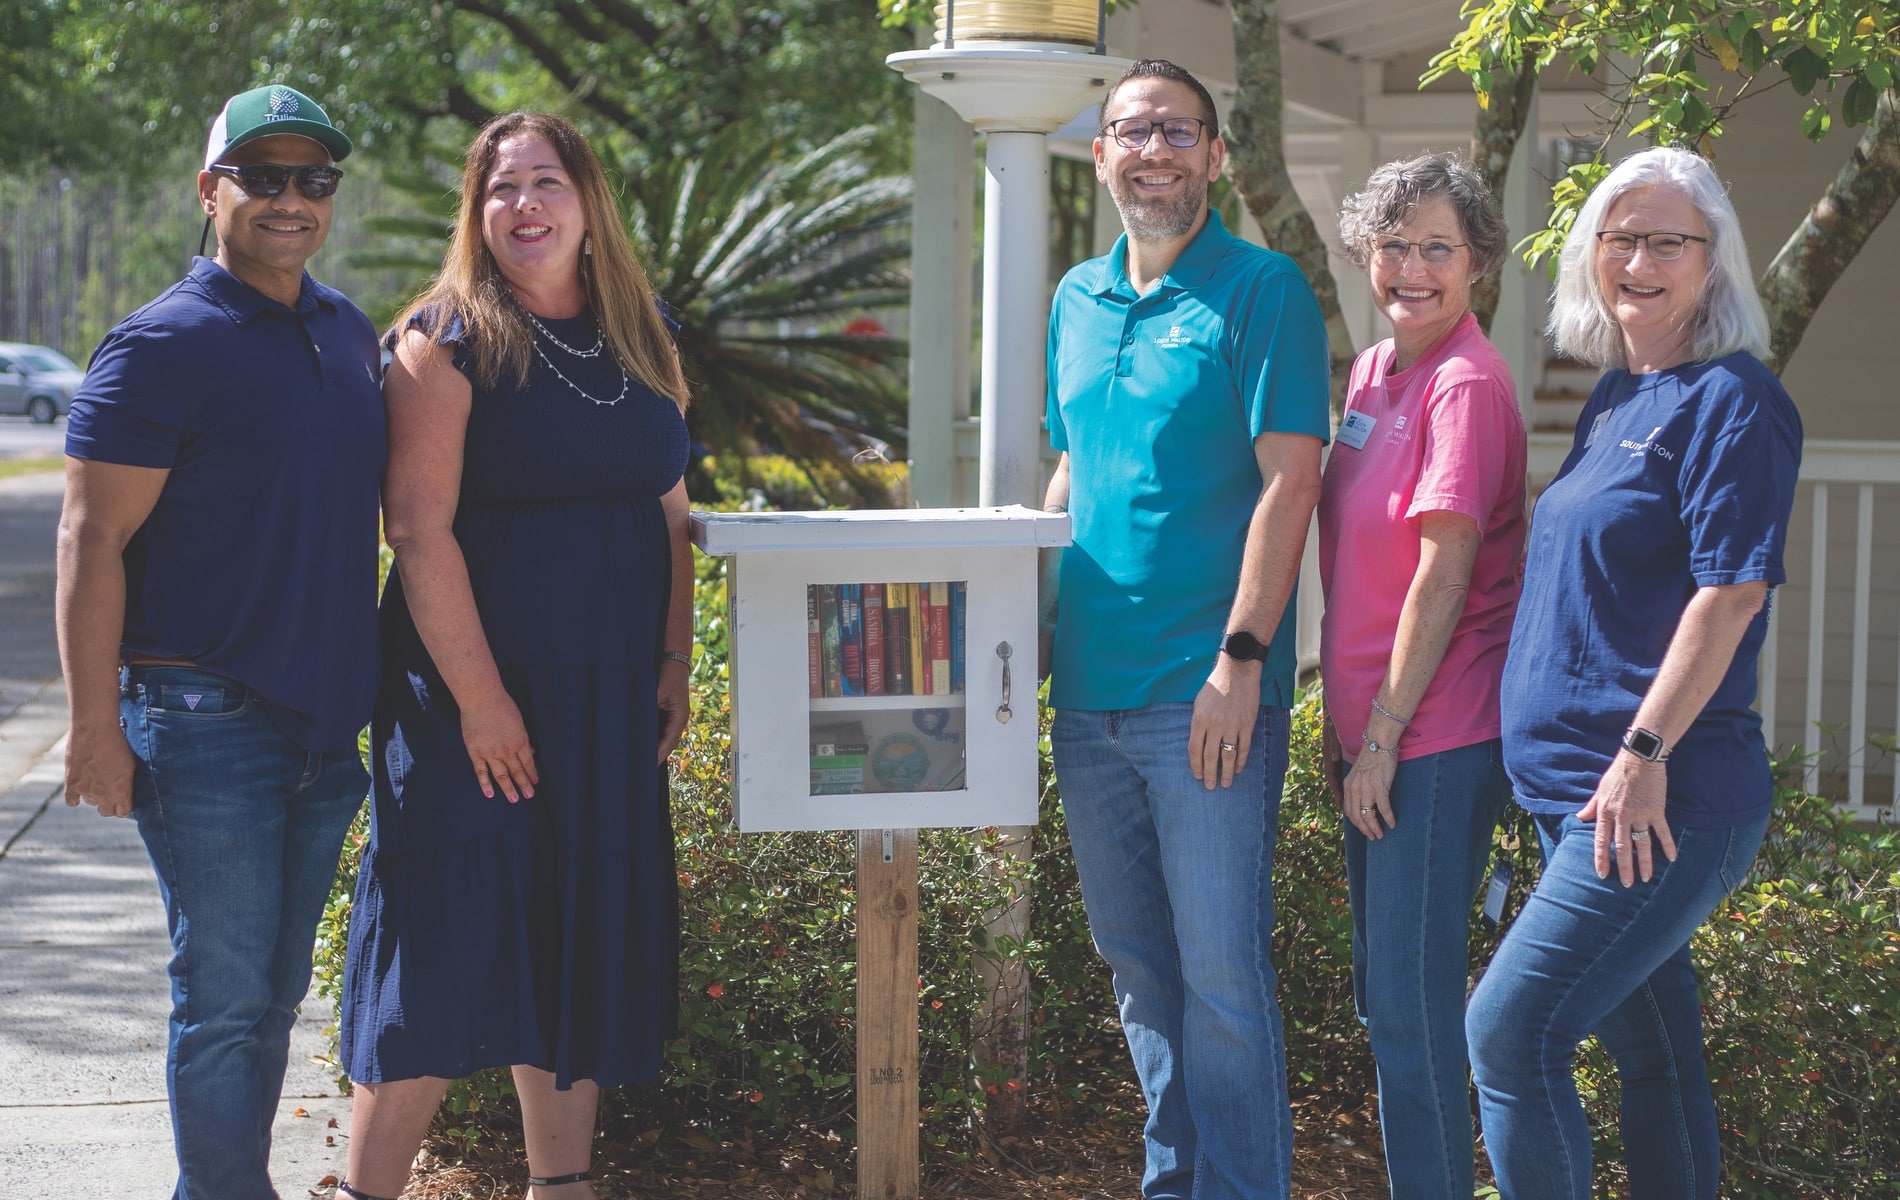 Tiny Libraries Spread the Joy of Reading Along 30A